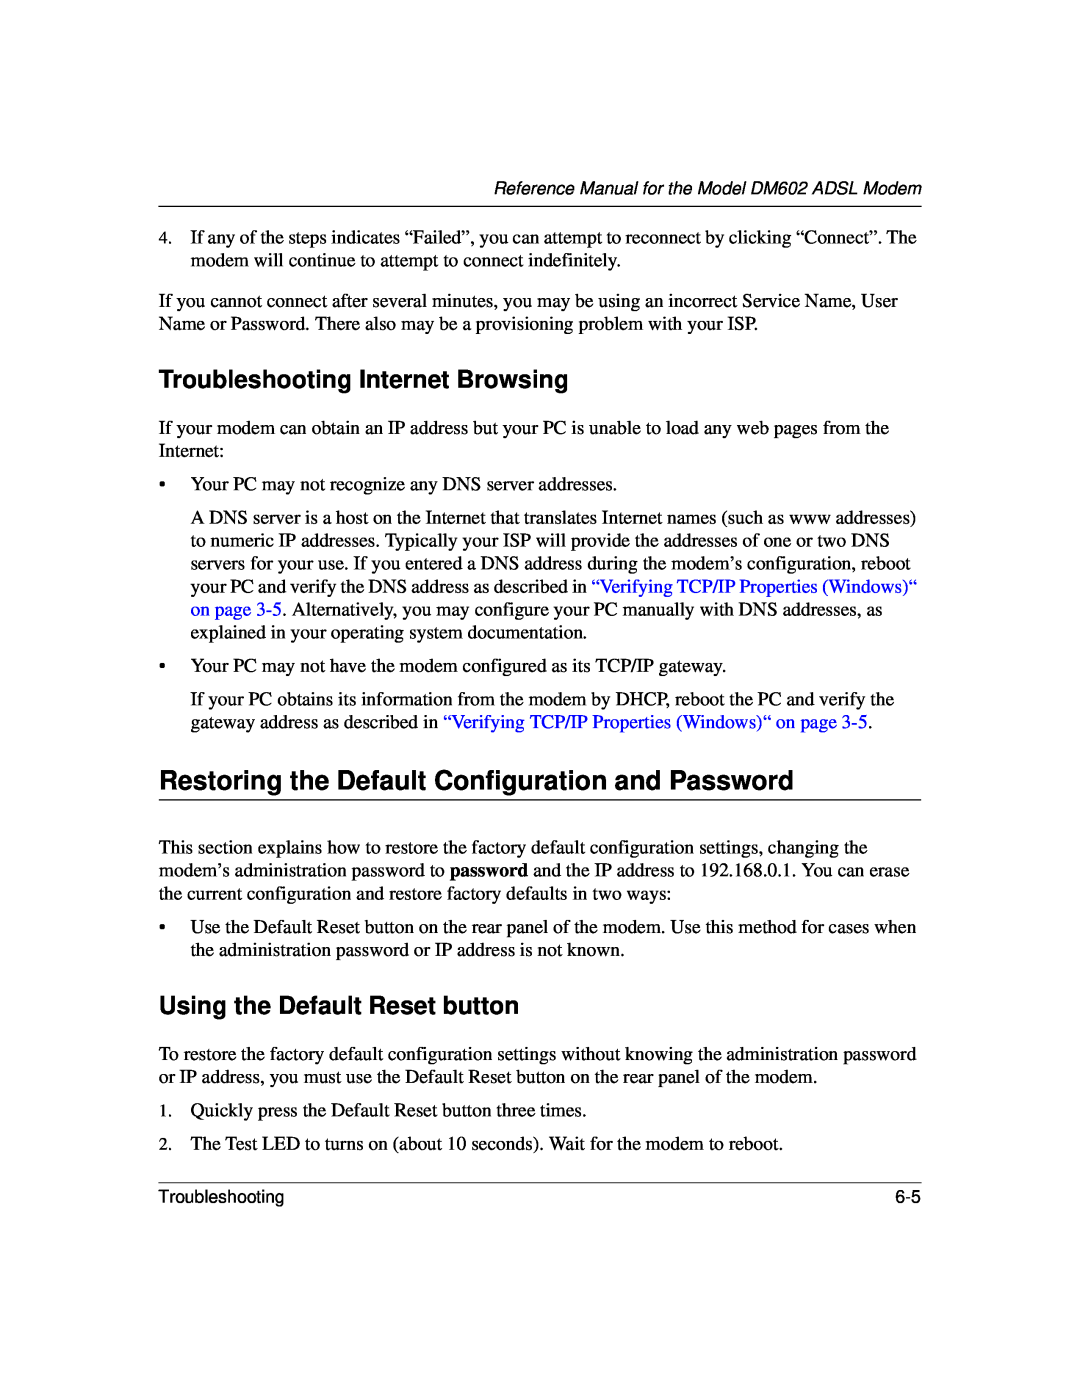 NETGEAR DM602 manual Restoring the Default Configuration and Password, Troubleshooting Internet Browsing 